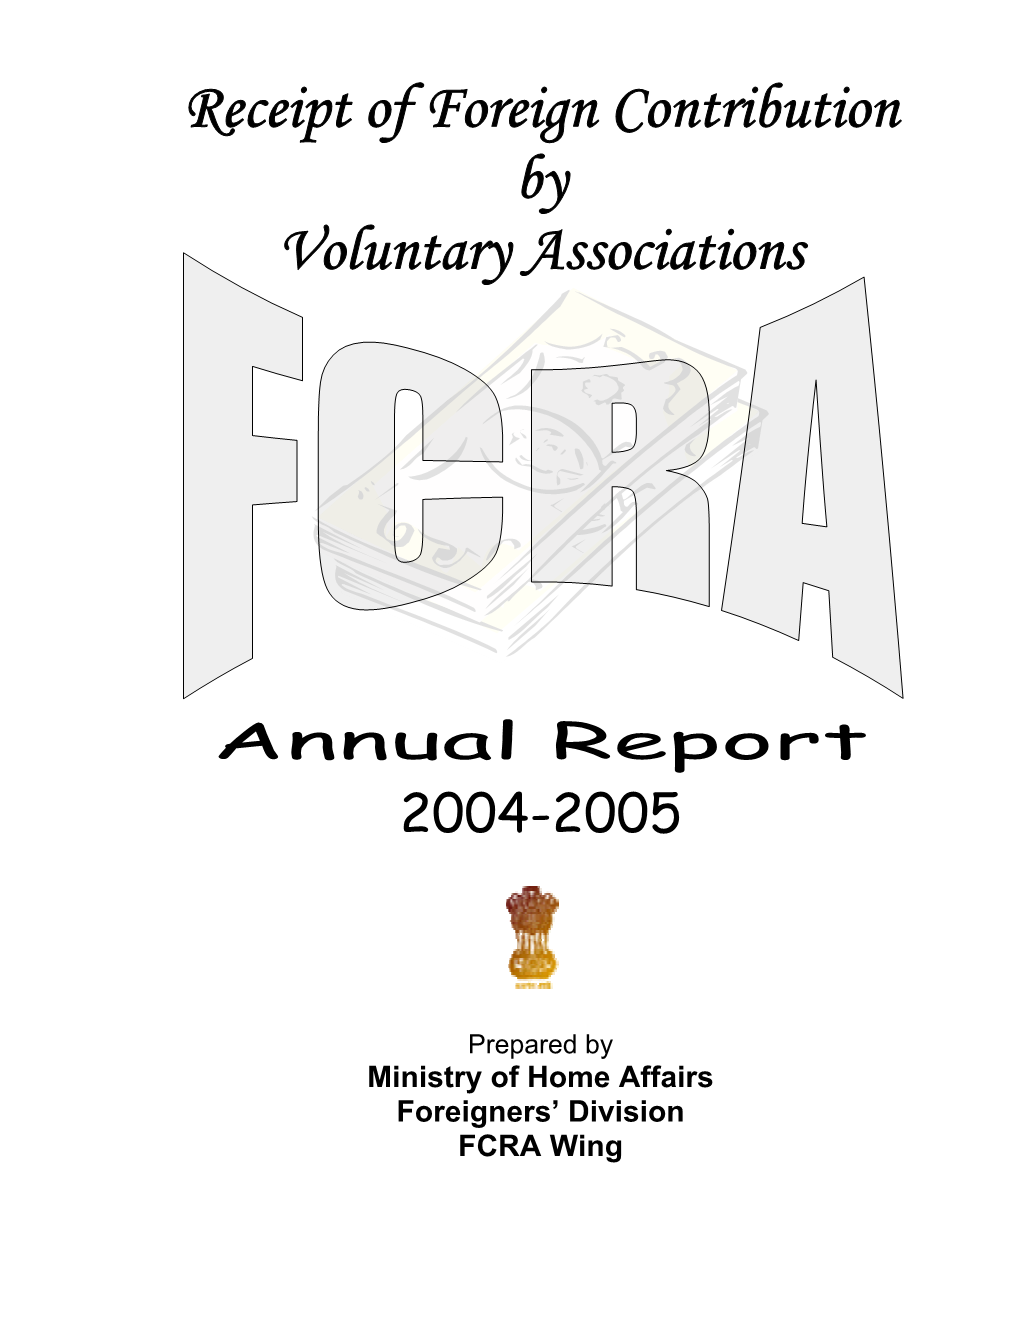 Receipt of Foreign Contribution by Voluntary Associations